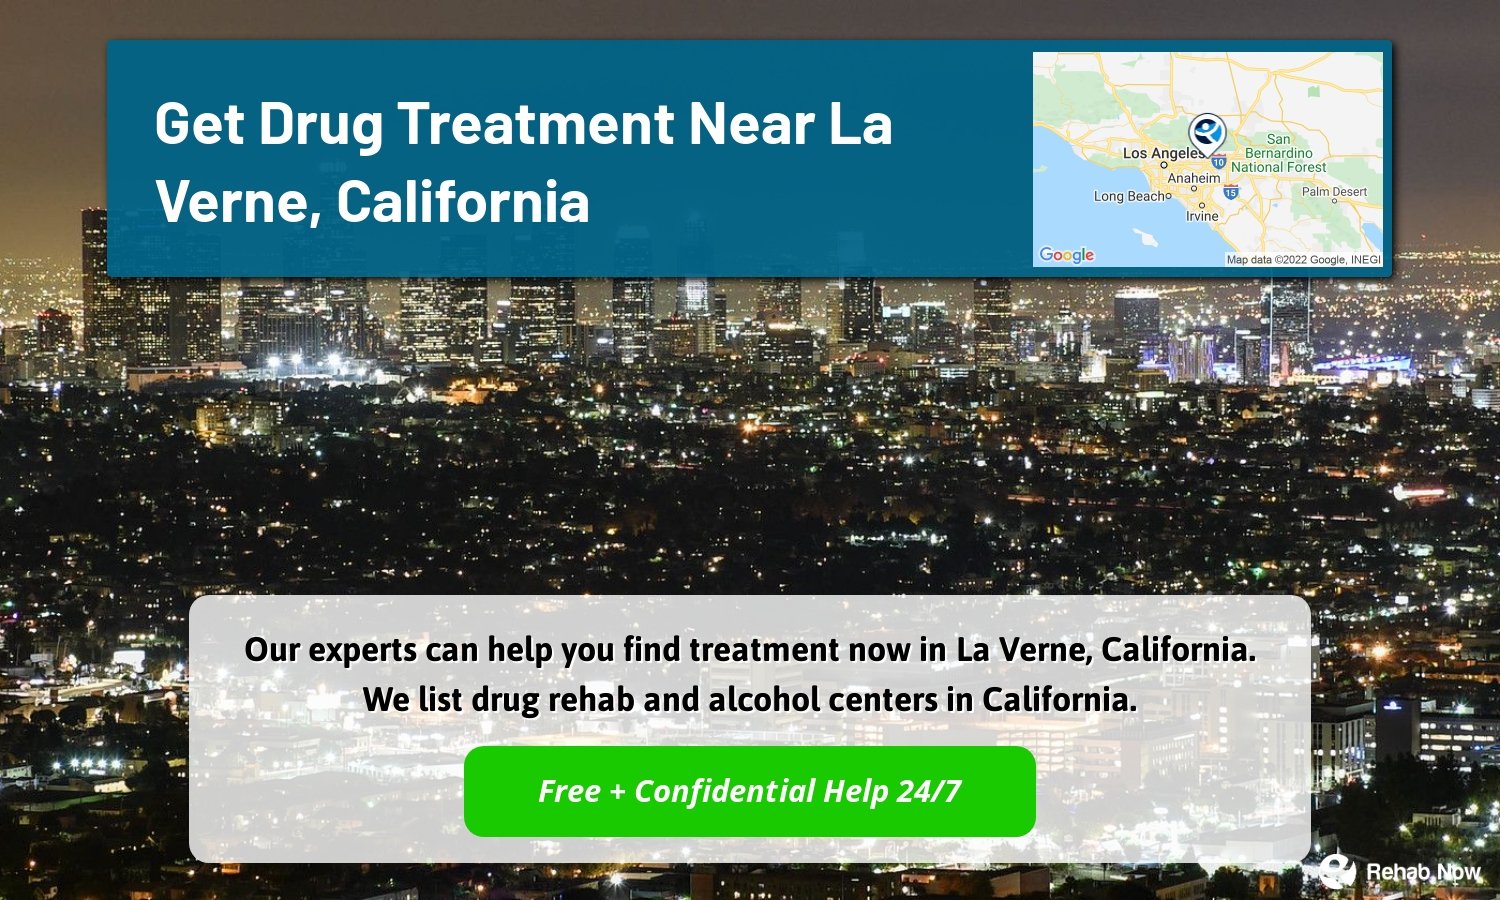 Our experts can help you find treatment now in La Verne, California. We list drug rehab and alcohol centers in California.